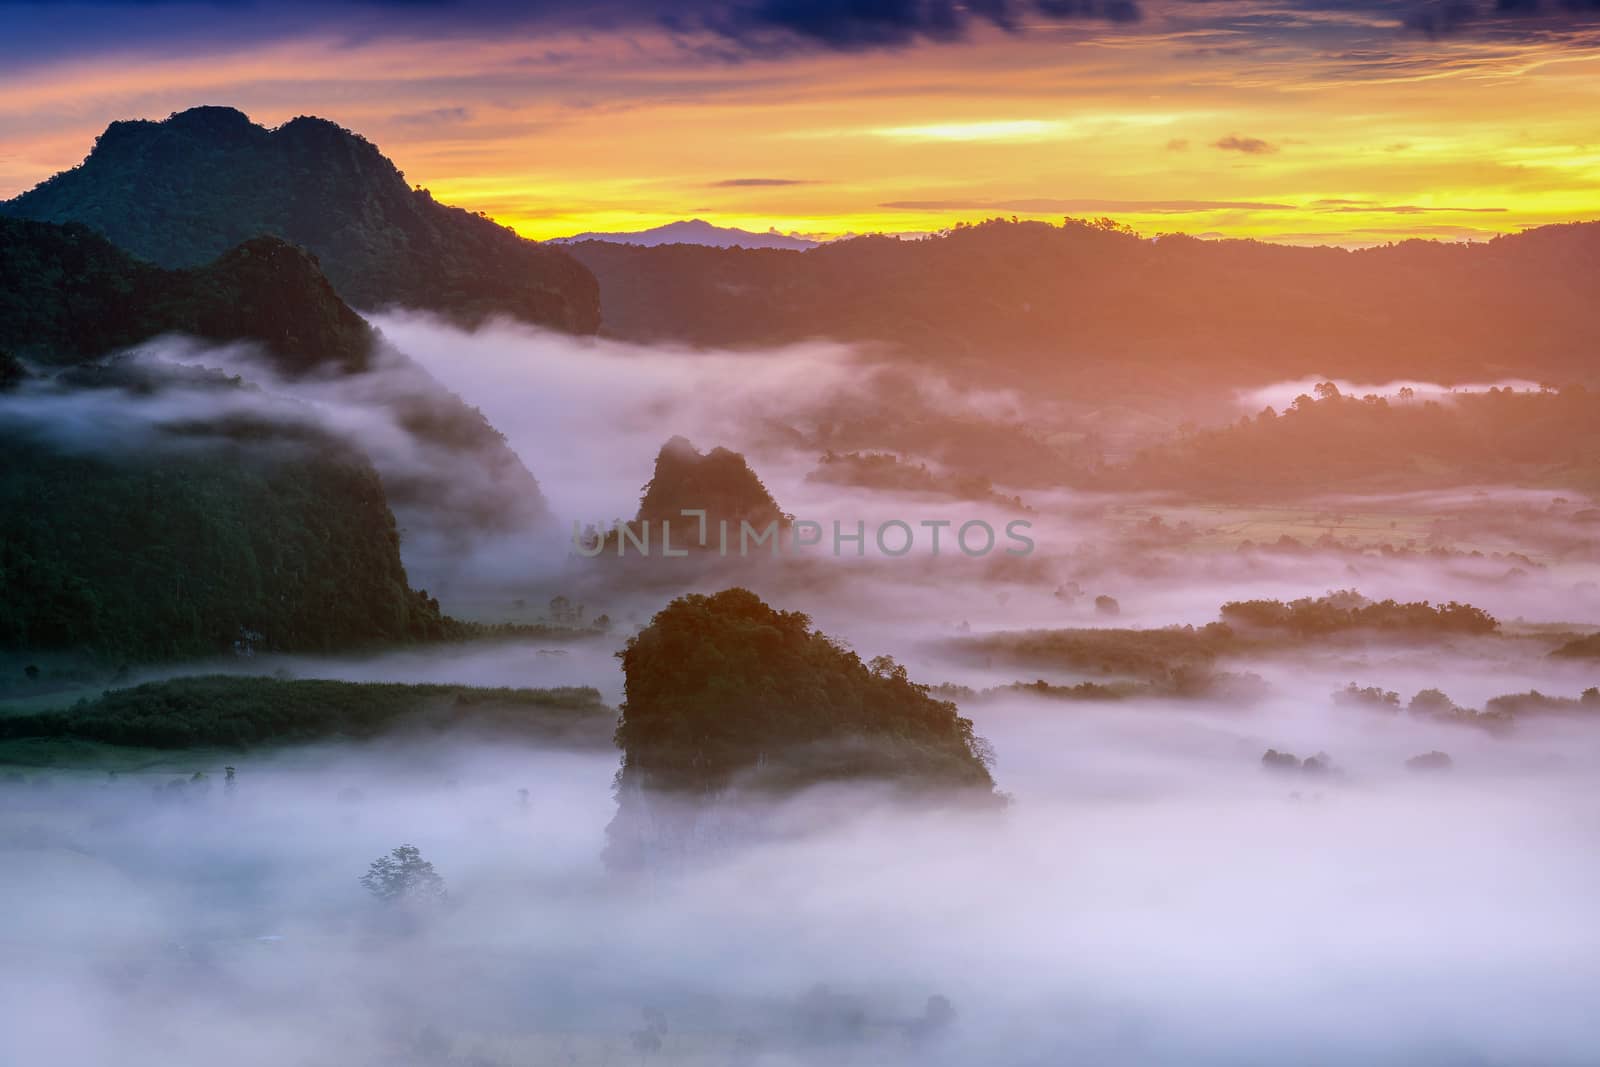 Sunrise on the morning mist at Phu Lang Ka, Phayao in Thailand. by gutarphotoghaphy